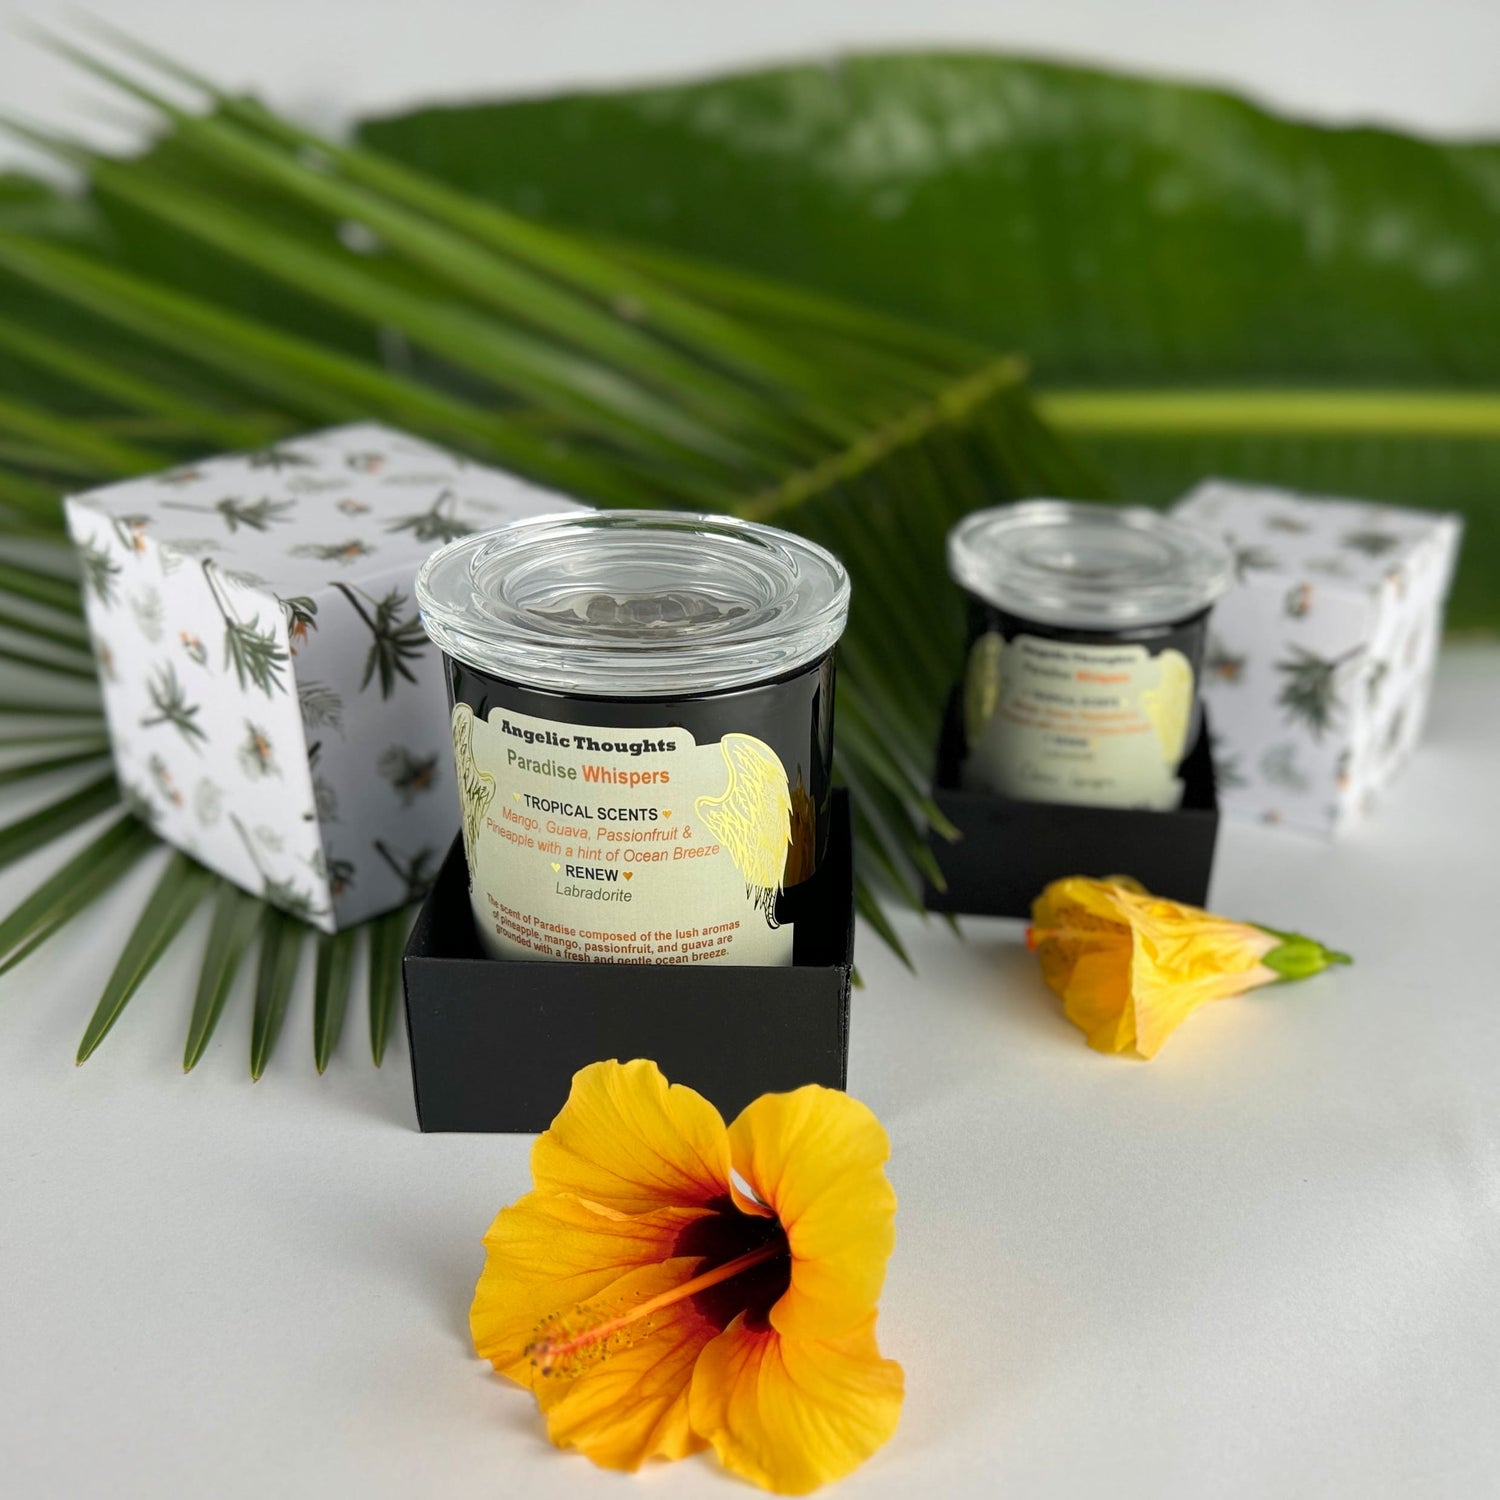 Golden orange hibiscus in foreground with medium and large Paradise Whispers candles in black box bases with lids featuring palm trees and bird of paradise flowers in the background